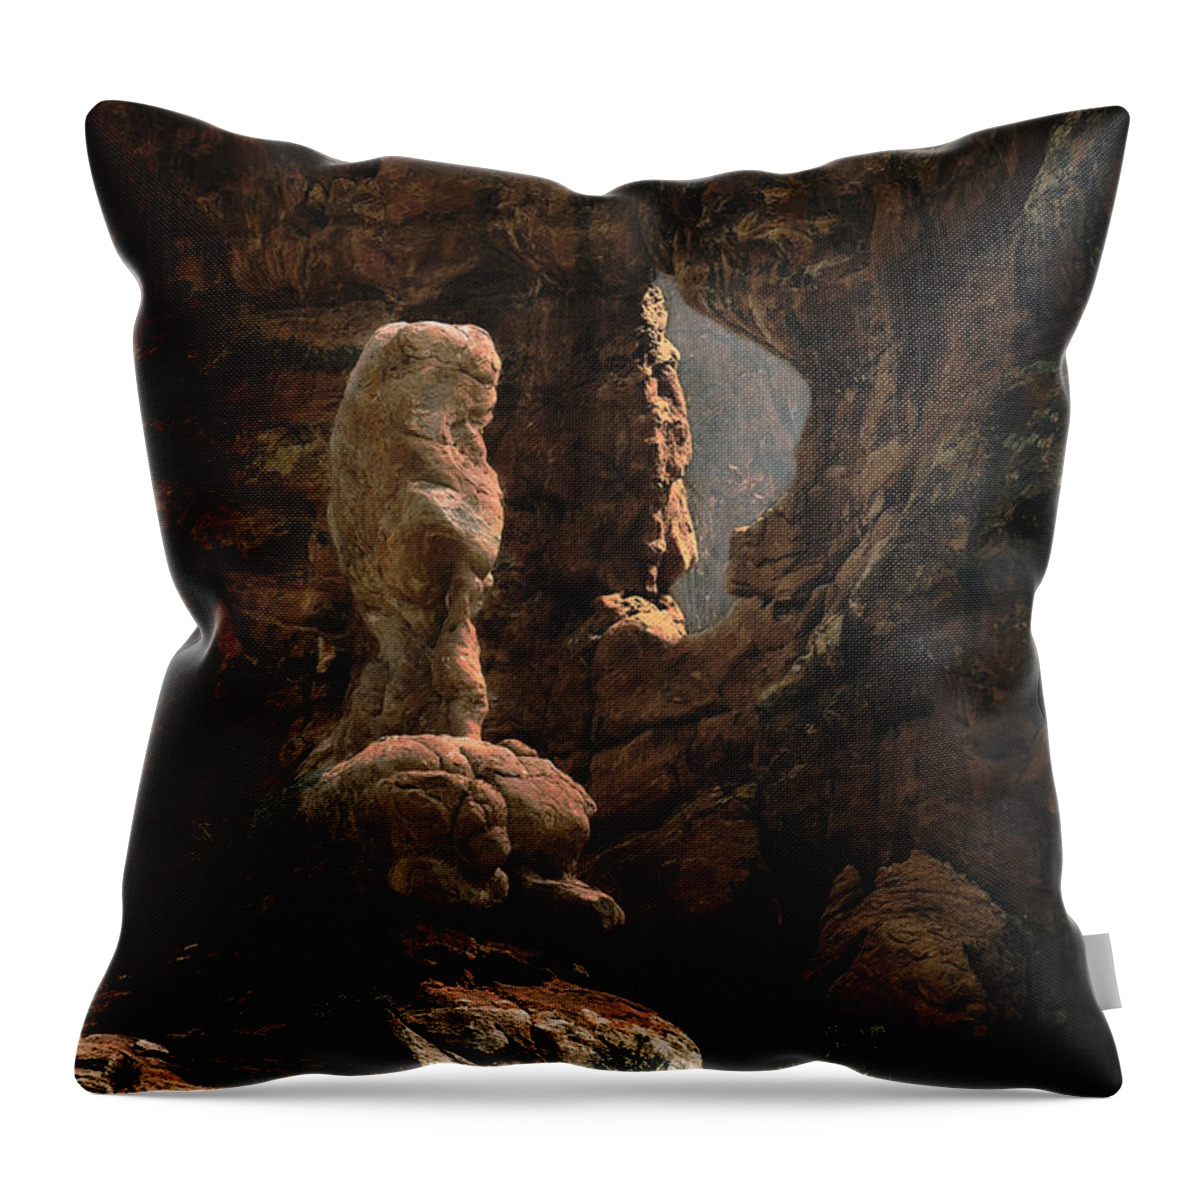 Desert Throw Pillow featuring the photograph Gremlin at the Window by John Christopher